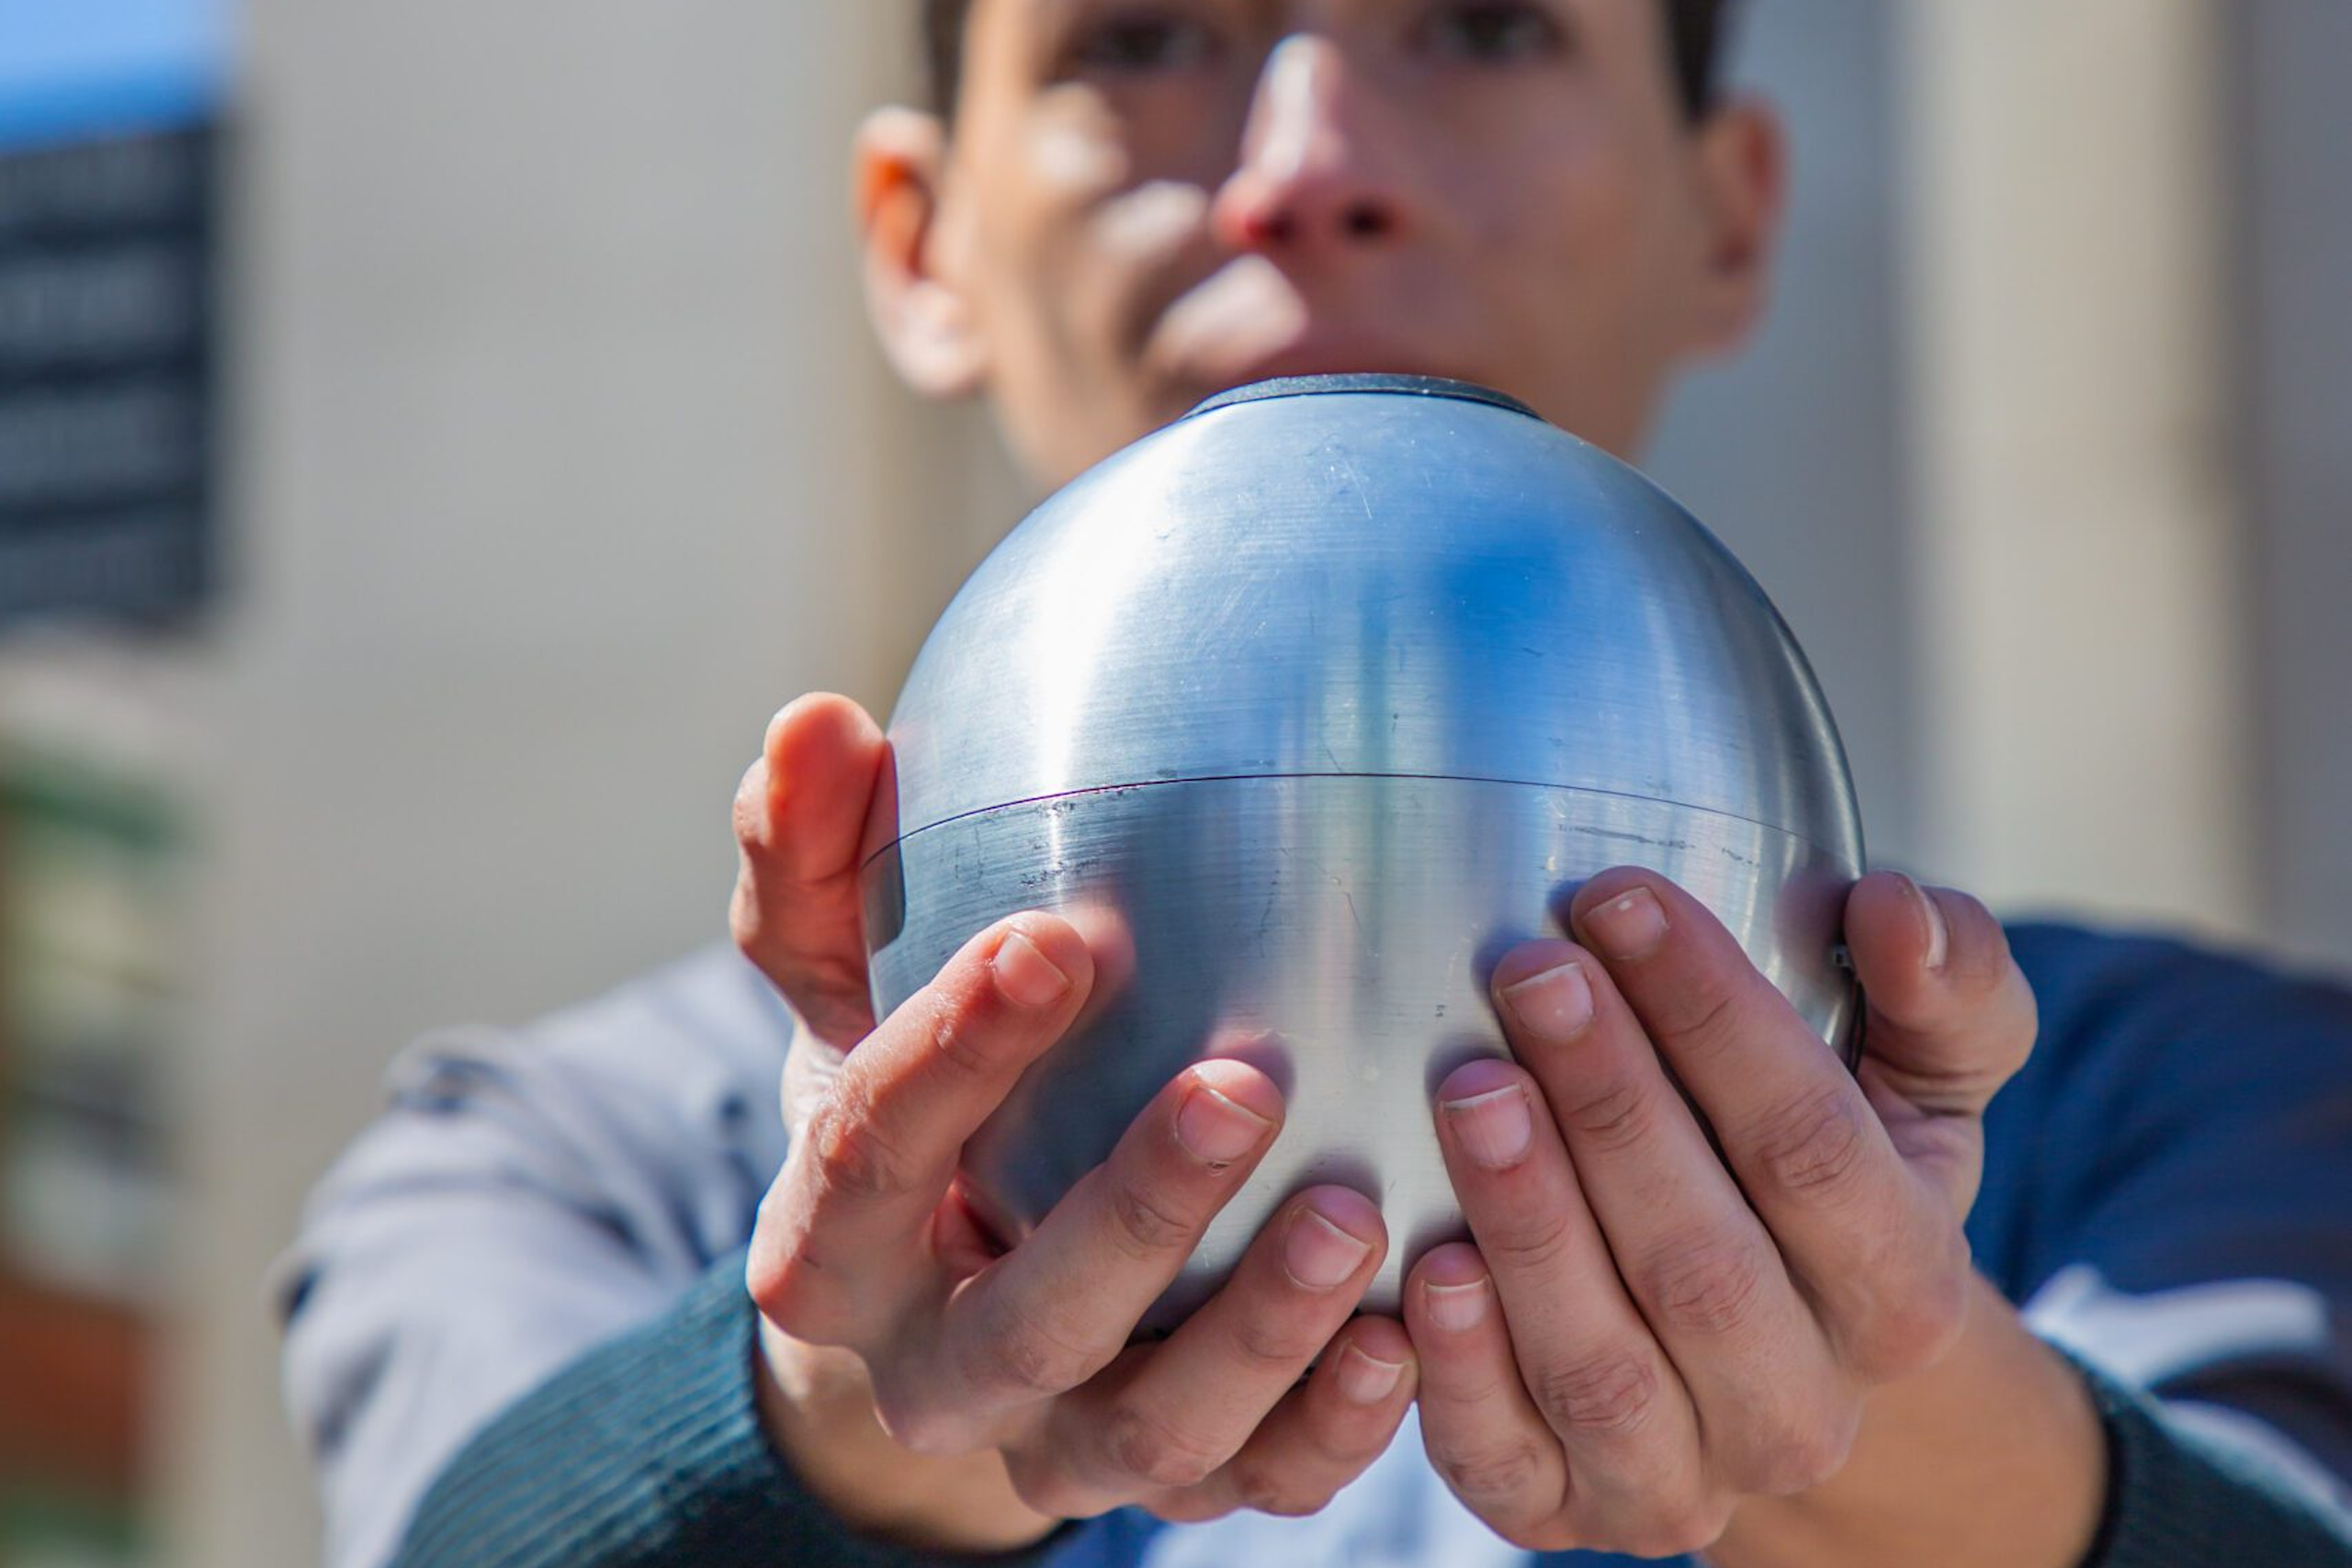 A person standing outside in the sun is holding a metal ball cupped in their hands that are out in front of them at shoulder height.